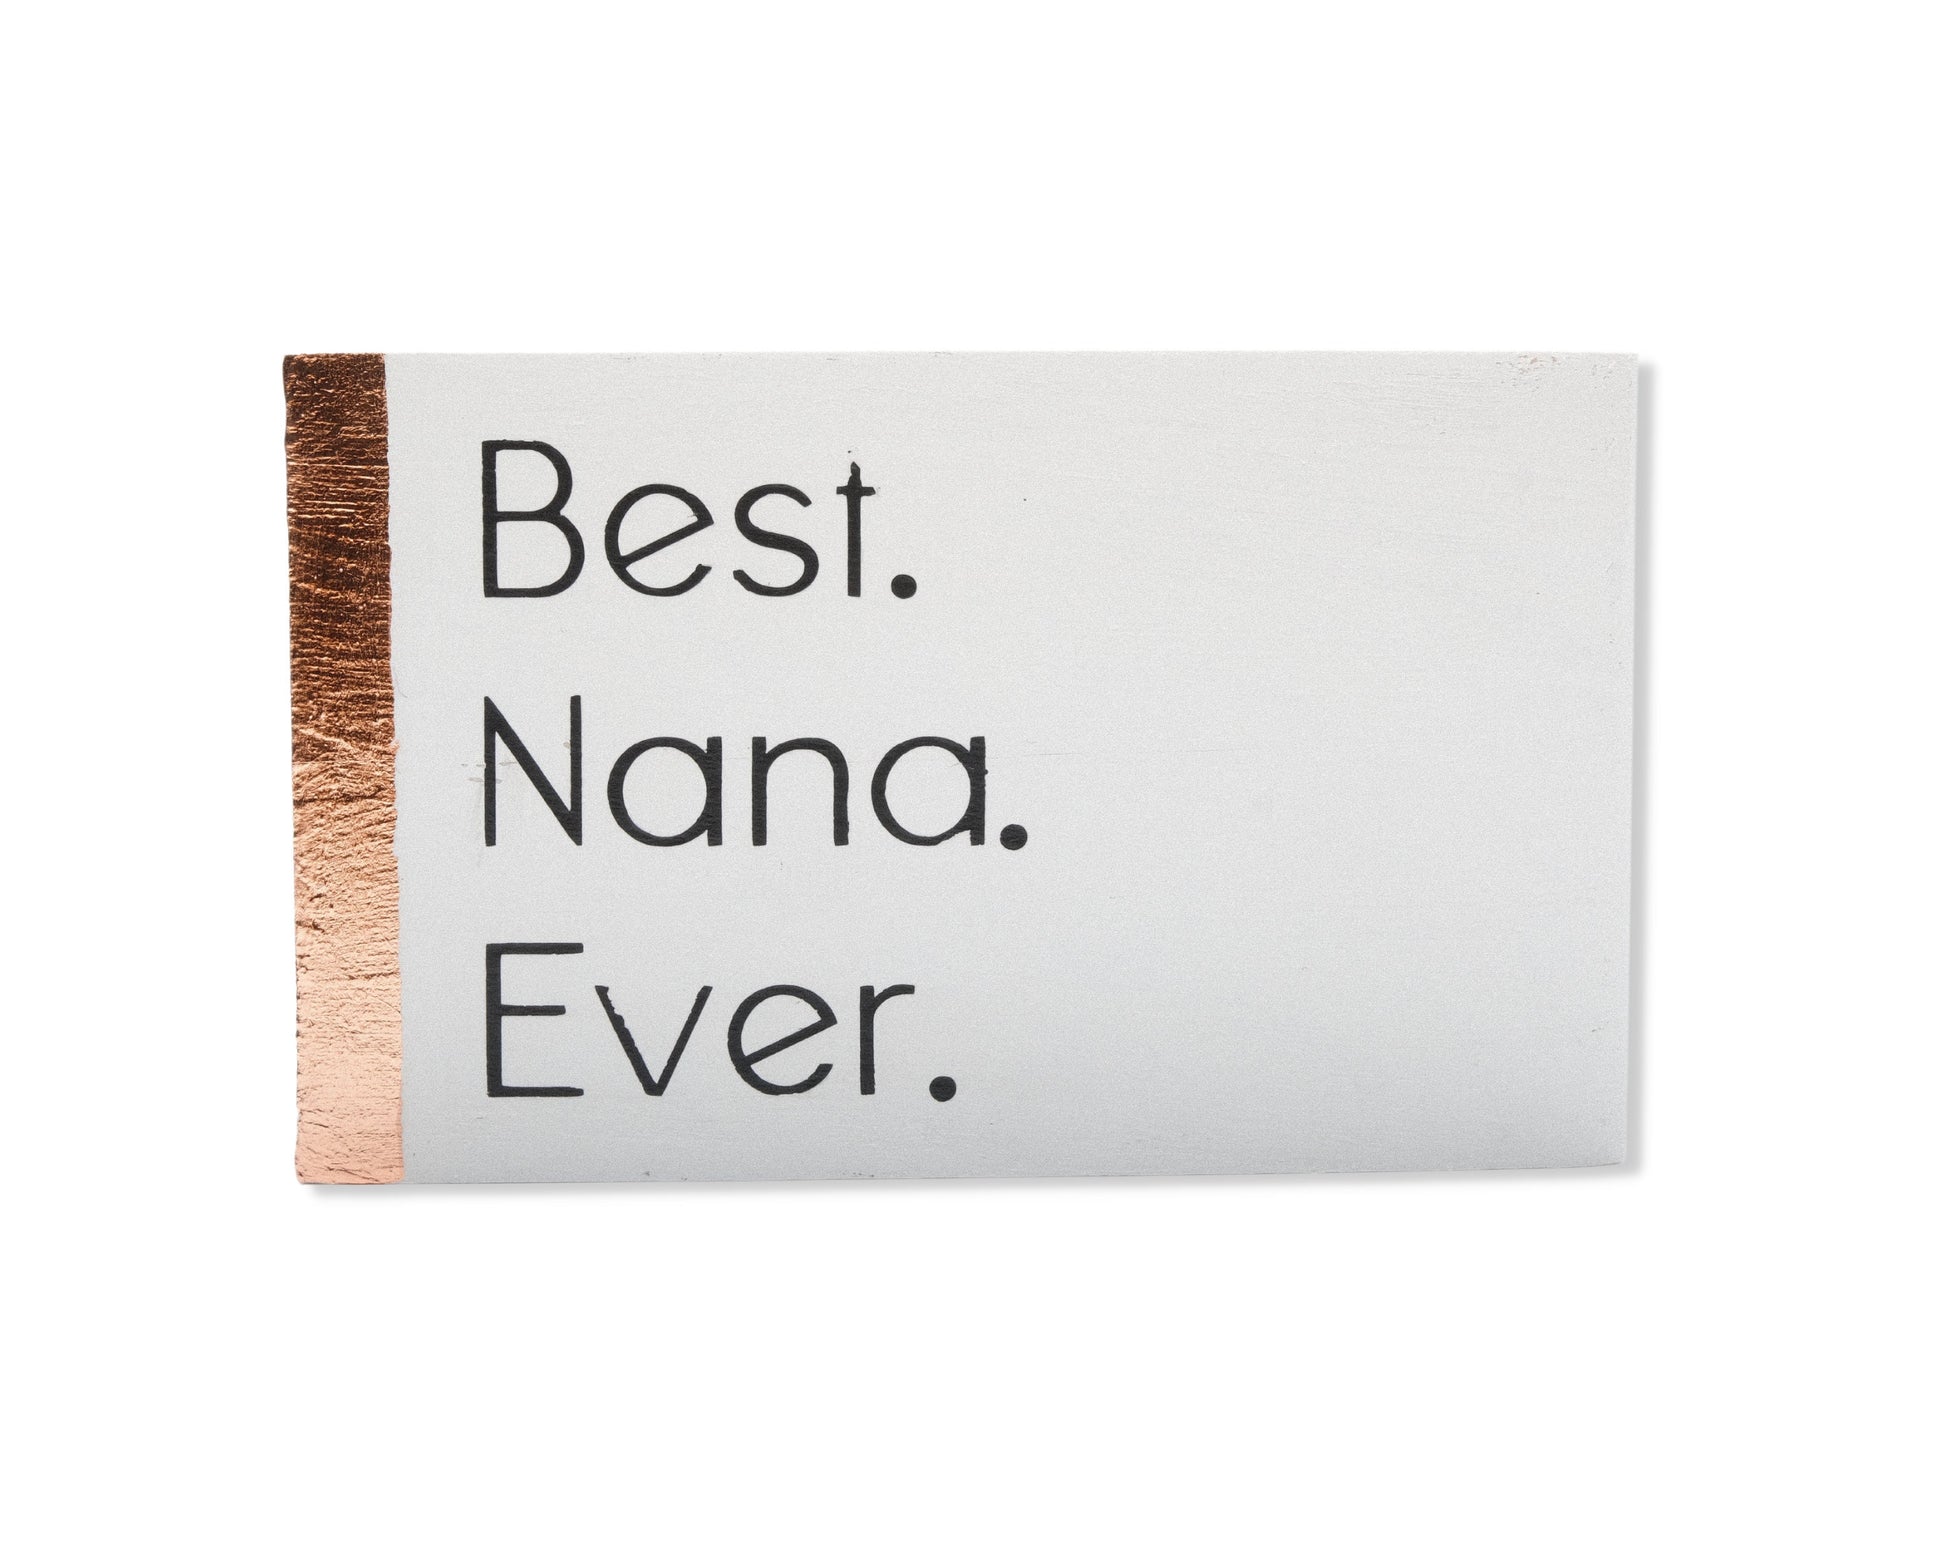 Small freestanding rectangular wooden sign facing straight on. White color with bronze rose gold vertical border on left side only. Black painted message, Best. Nana. Ever. Studio style photo on white background.